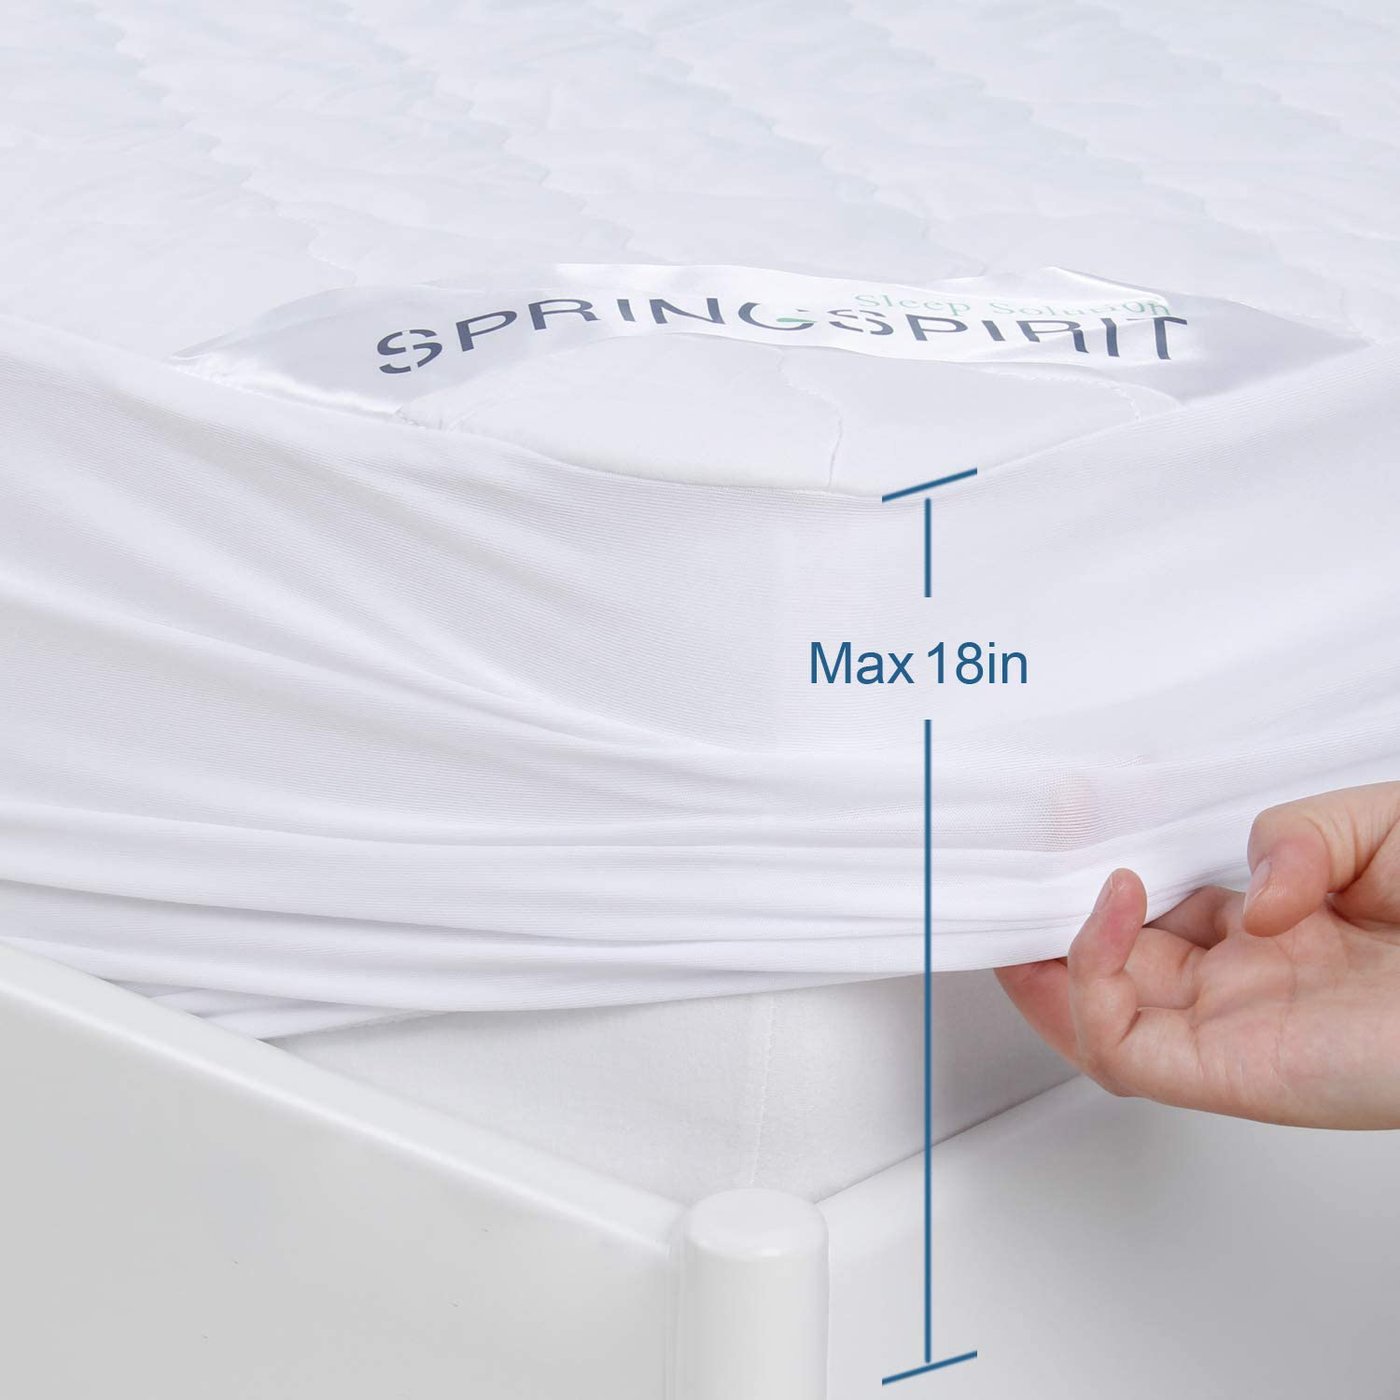 SPRINGSPIRIT Mattress Pad Cover Waterproof California King Size, Breathable & Machine Washable California King Mattress Protector Quilted Fitted with Deep Pocket up to 18" Depth (72"x 84")